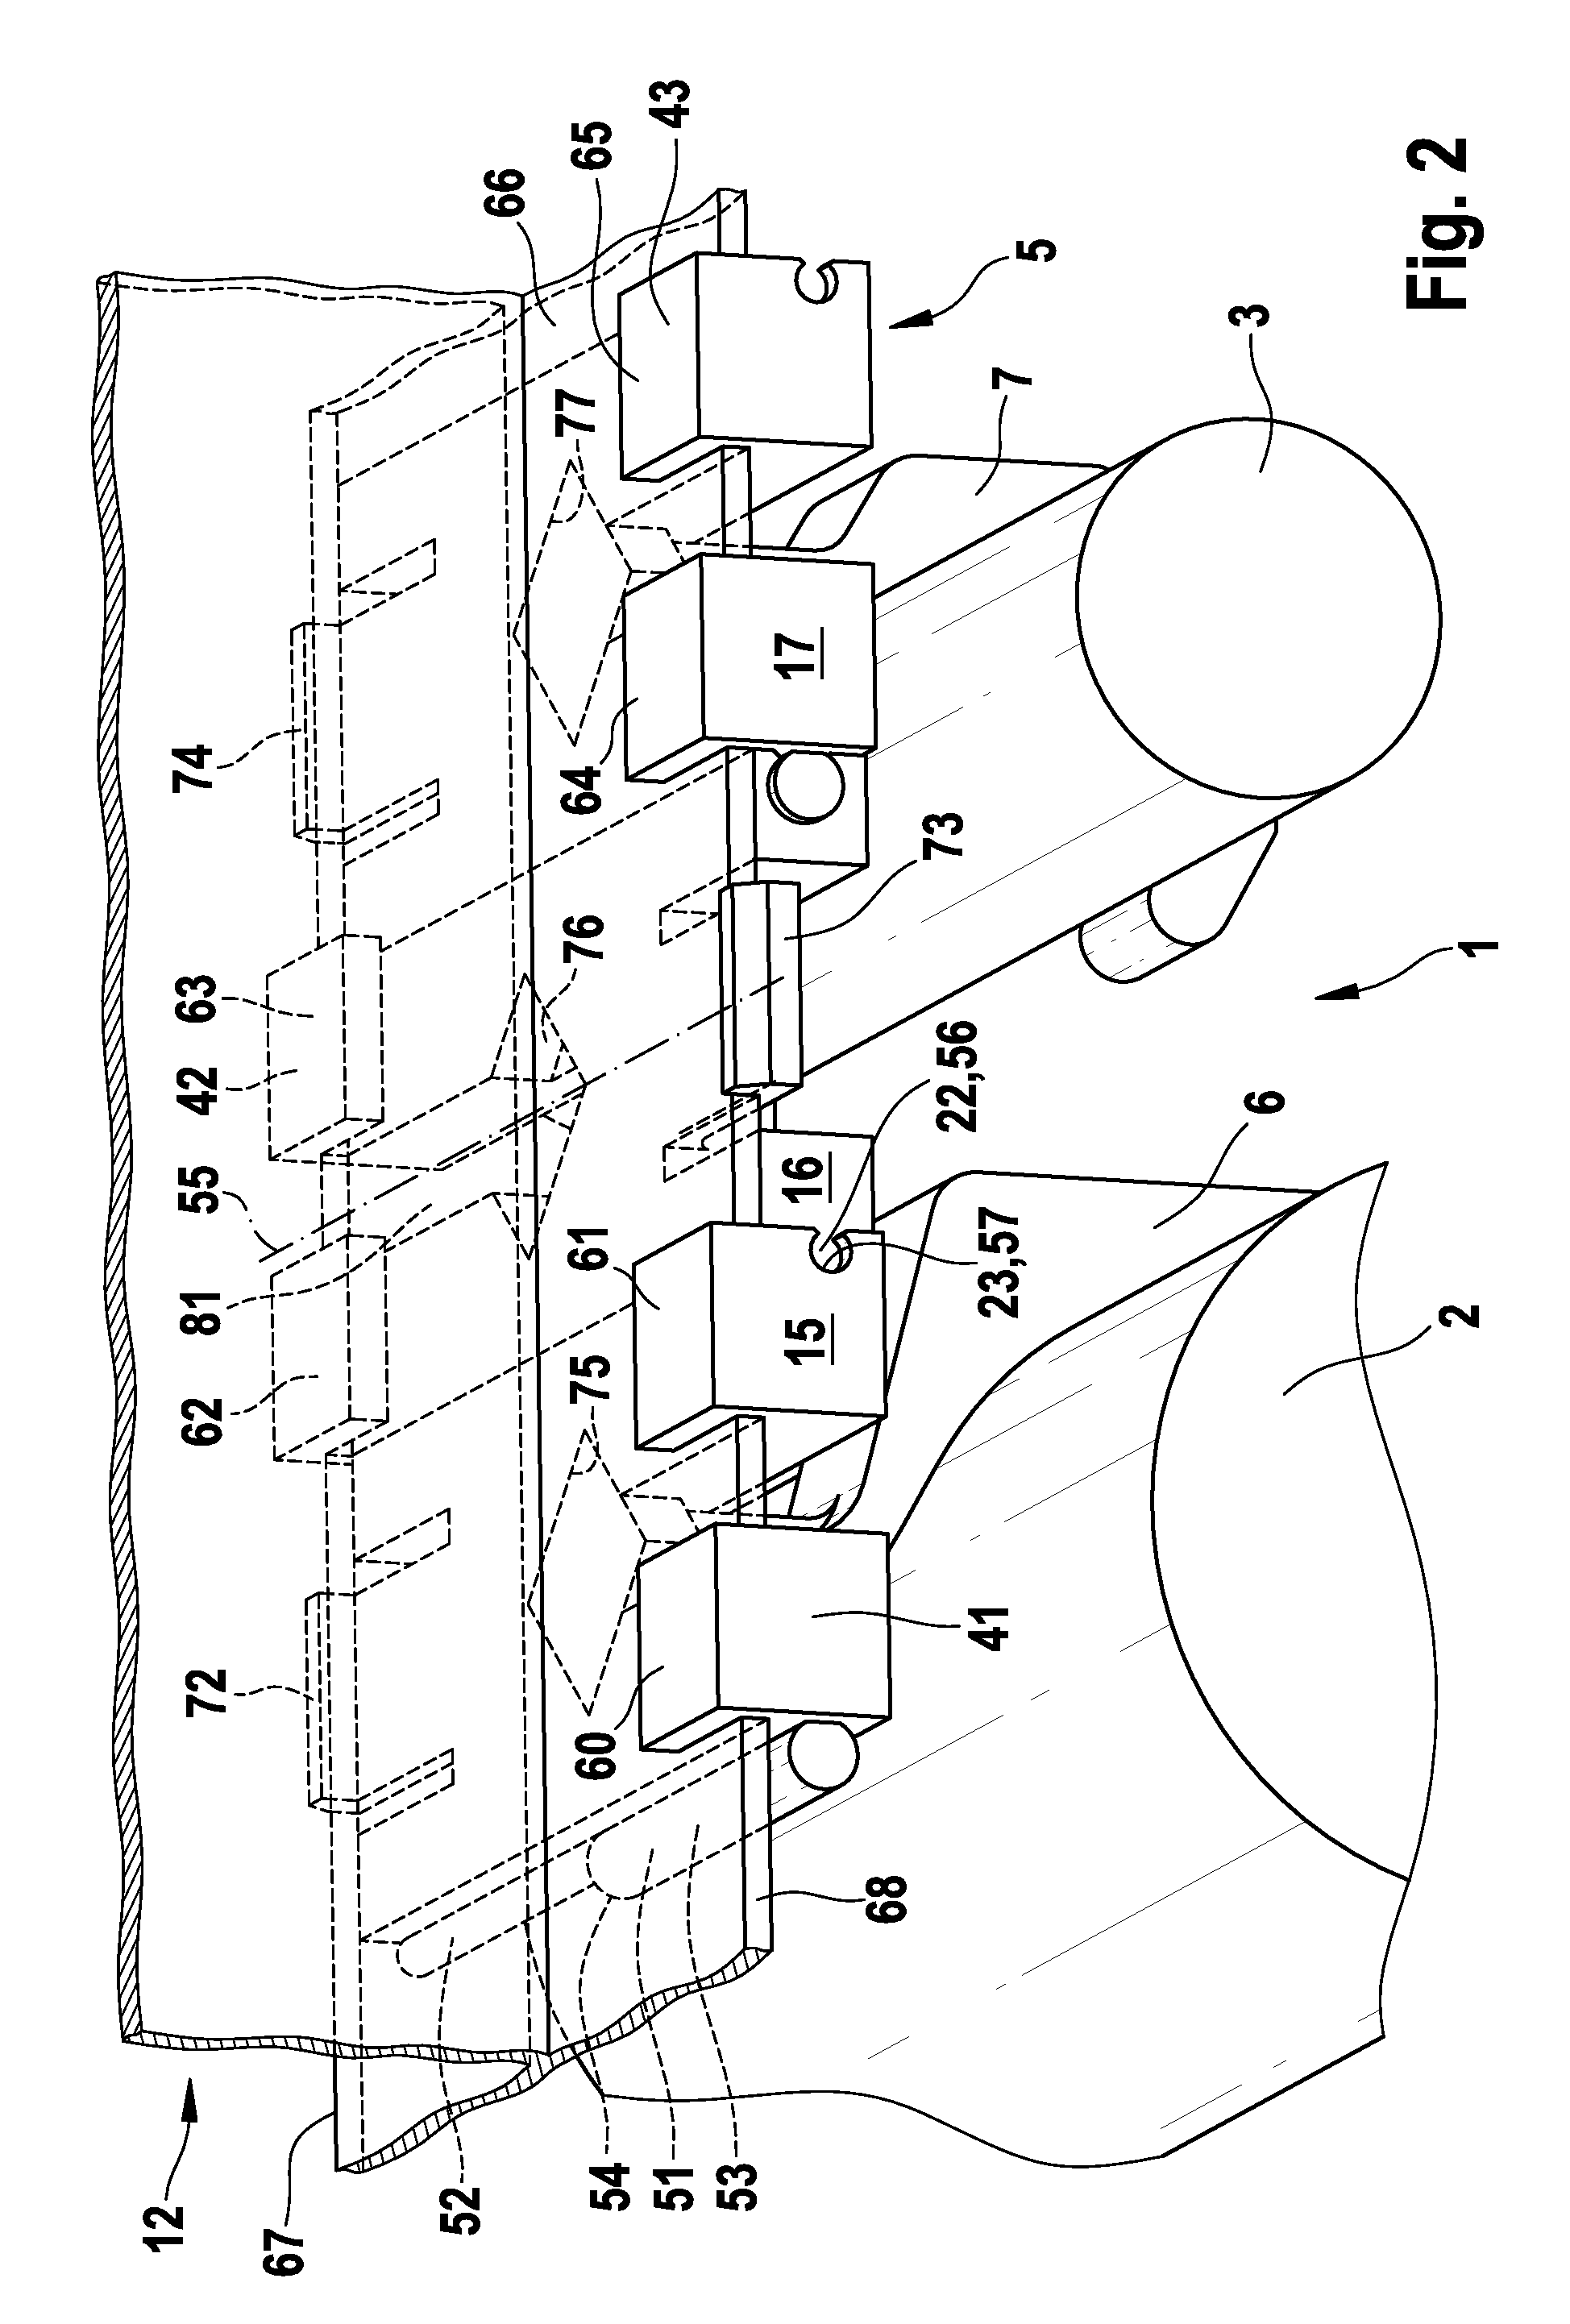 Device for supporting systems